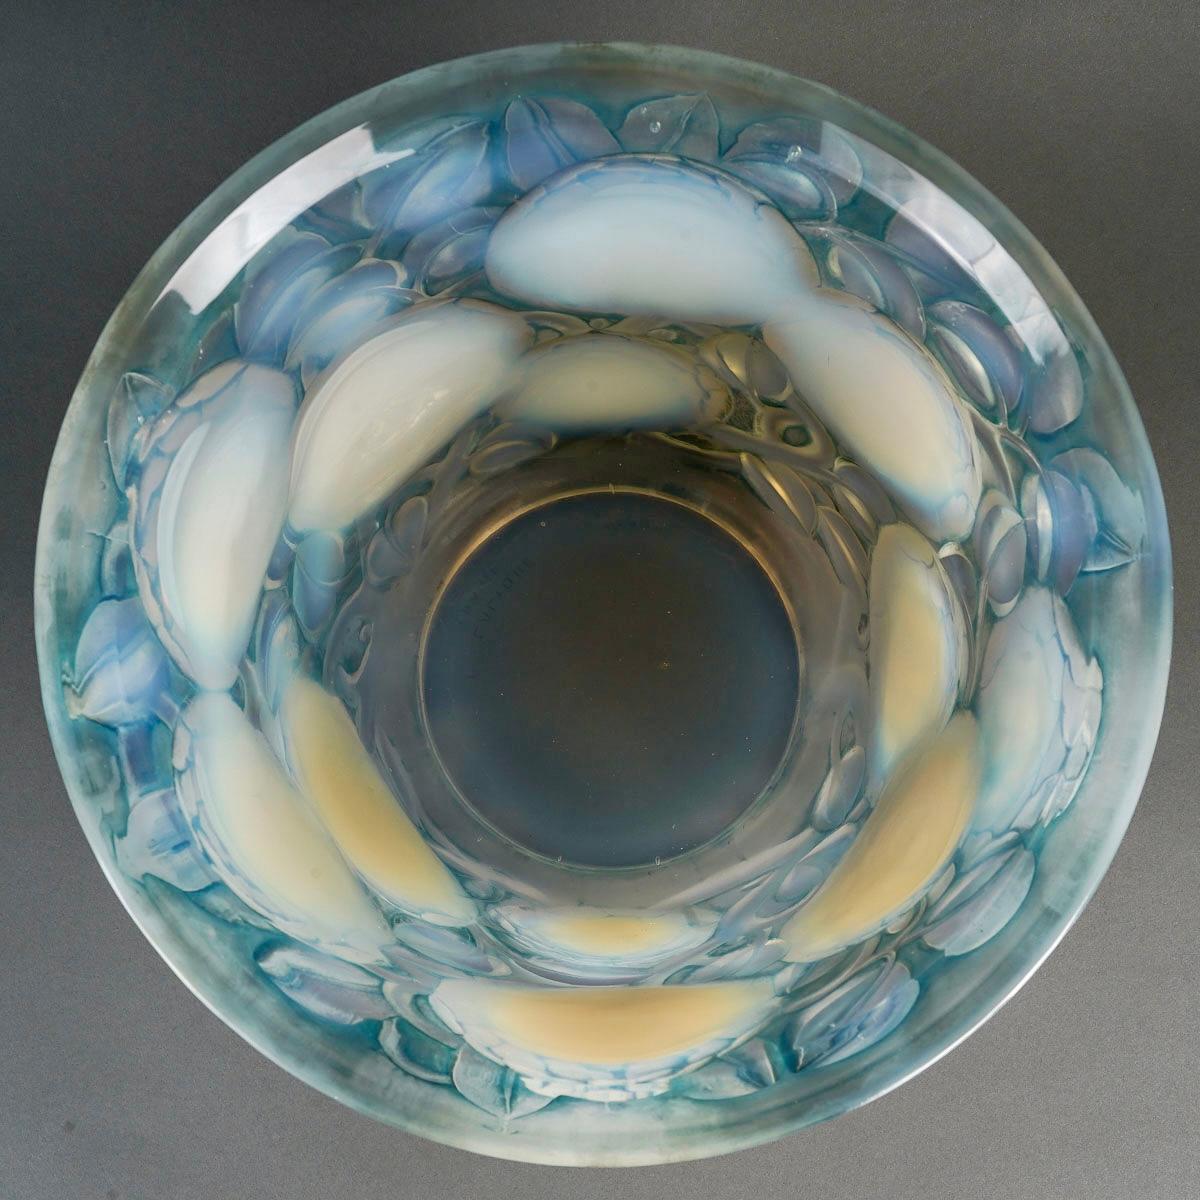 Molded 1927 Rene Lalique Vase Oran Opalescent Glass with Blue Patina For Sale